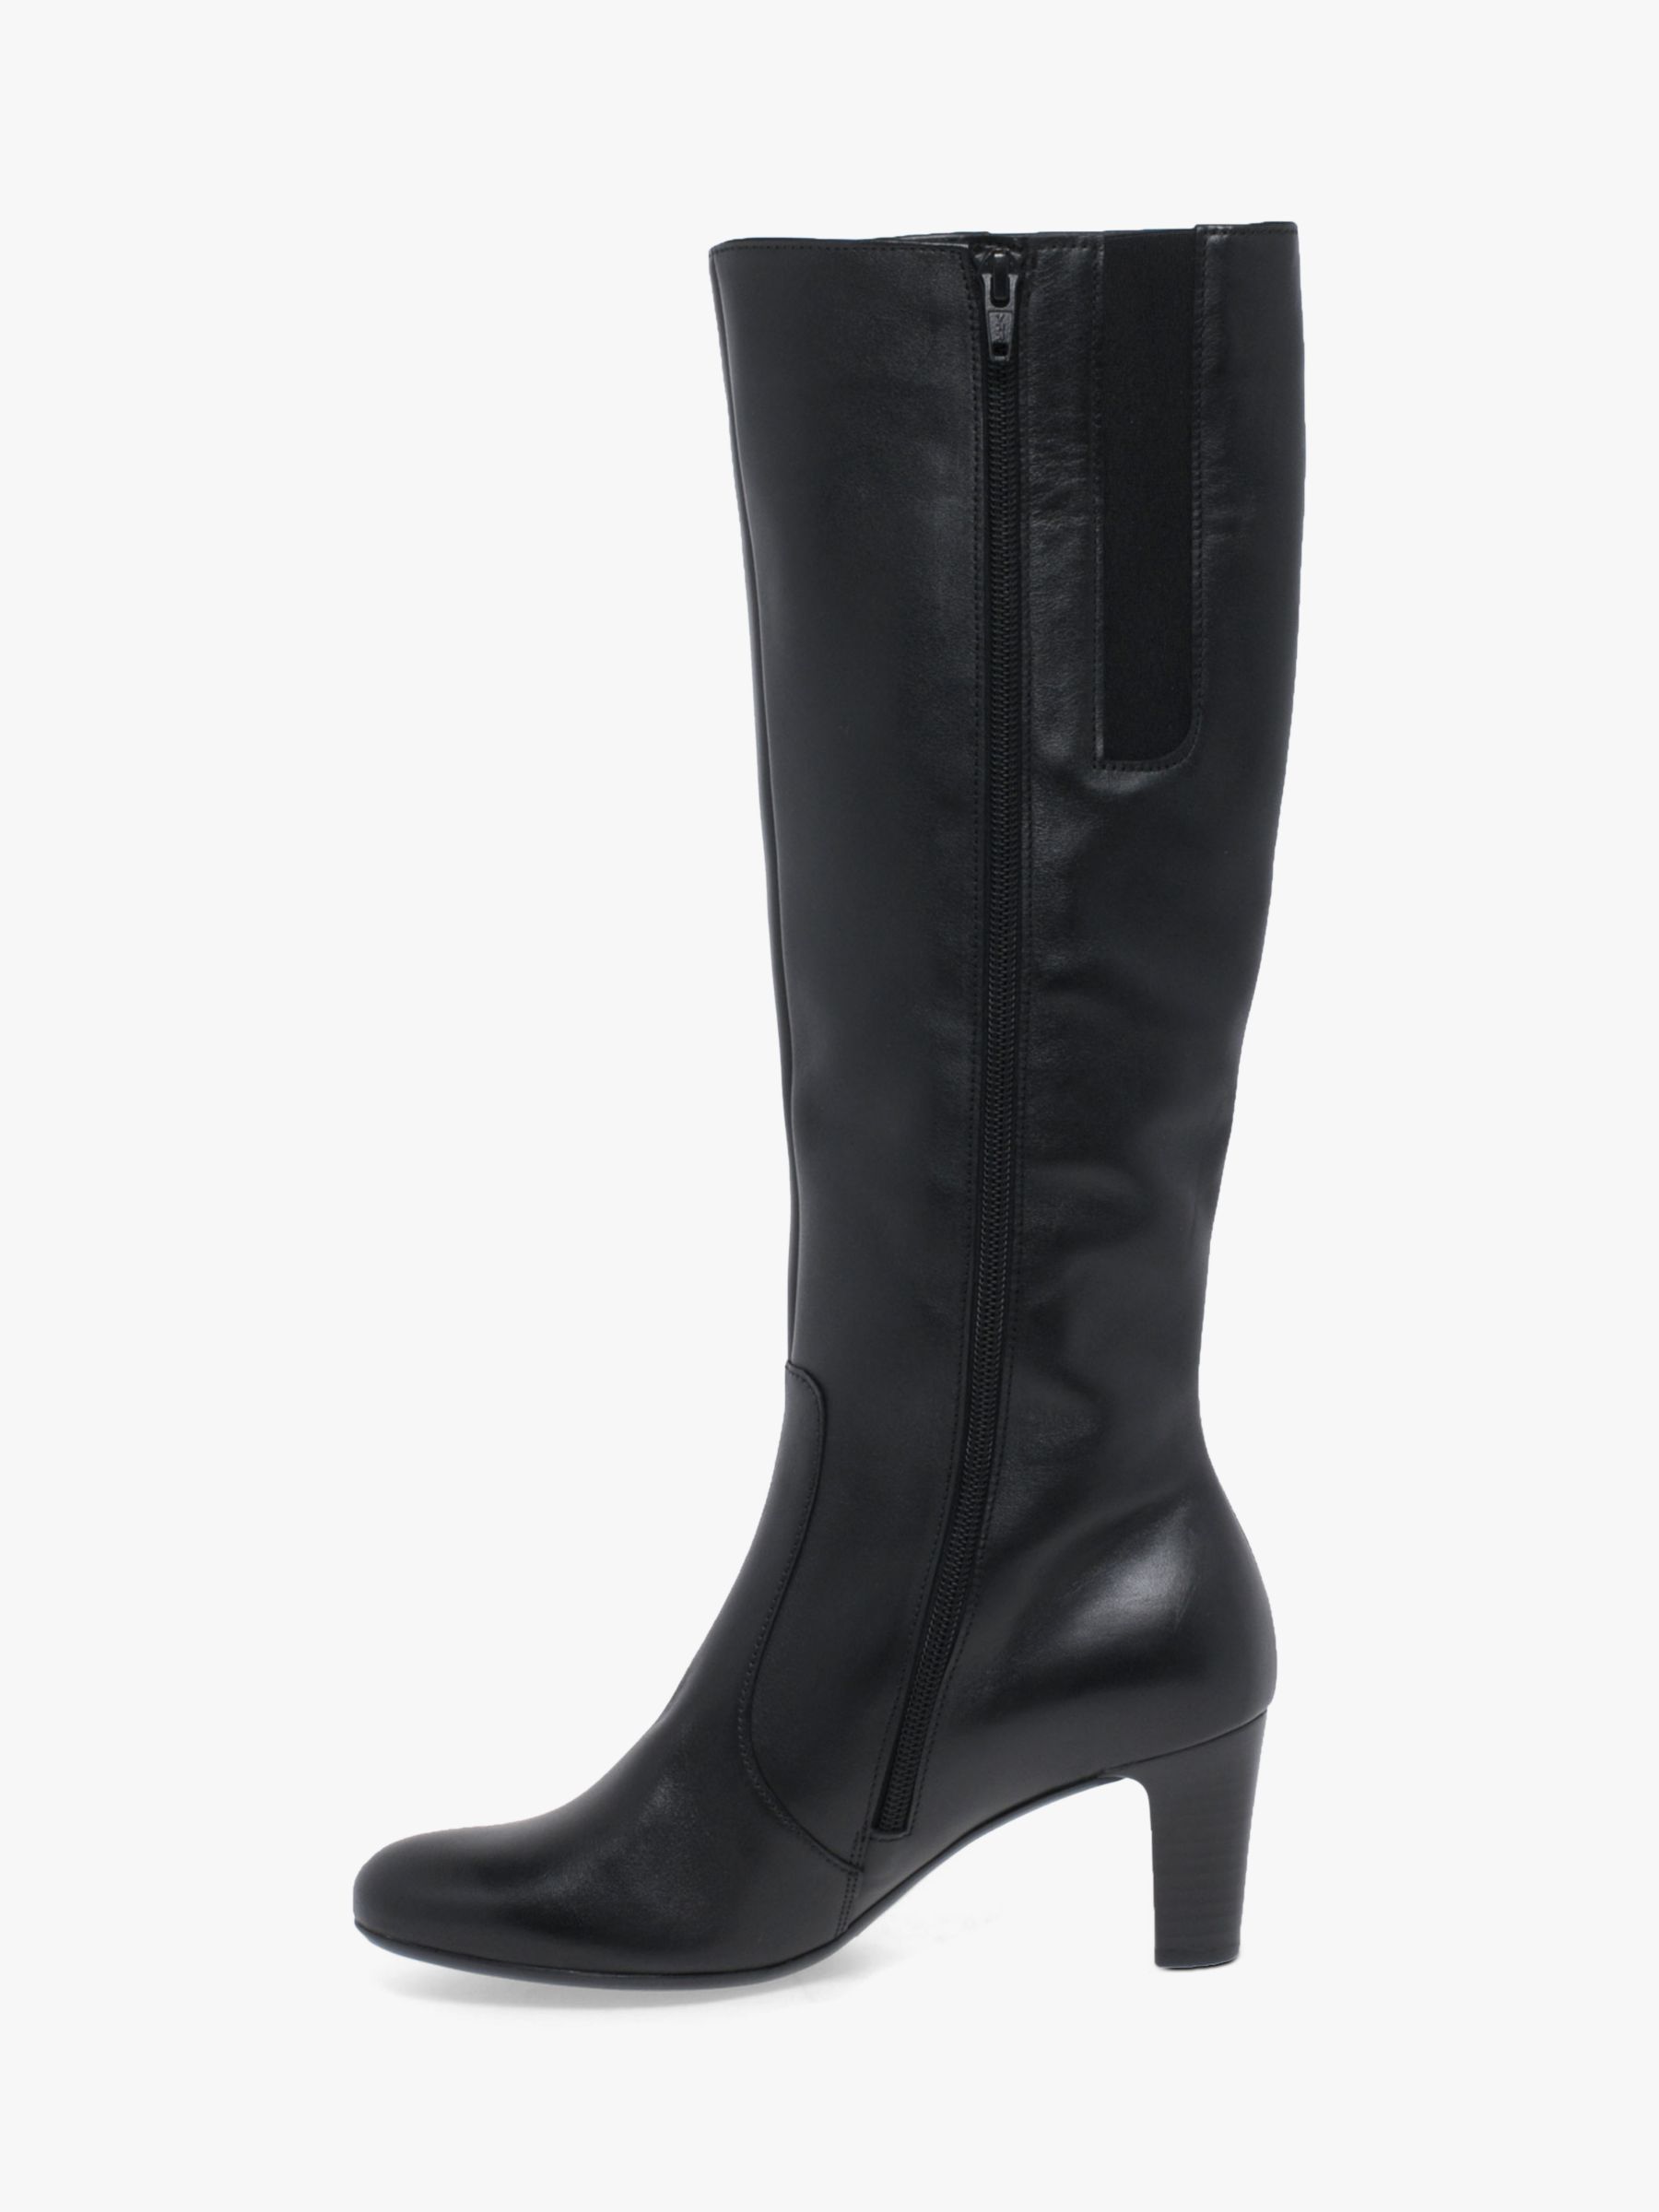 Gabor Maybe Slim Fit High Boots, Black at Lewis &